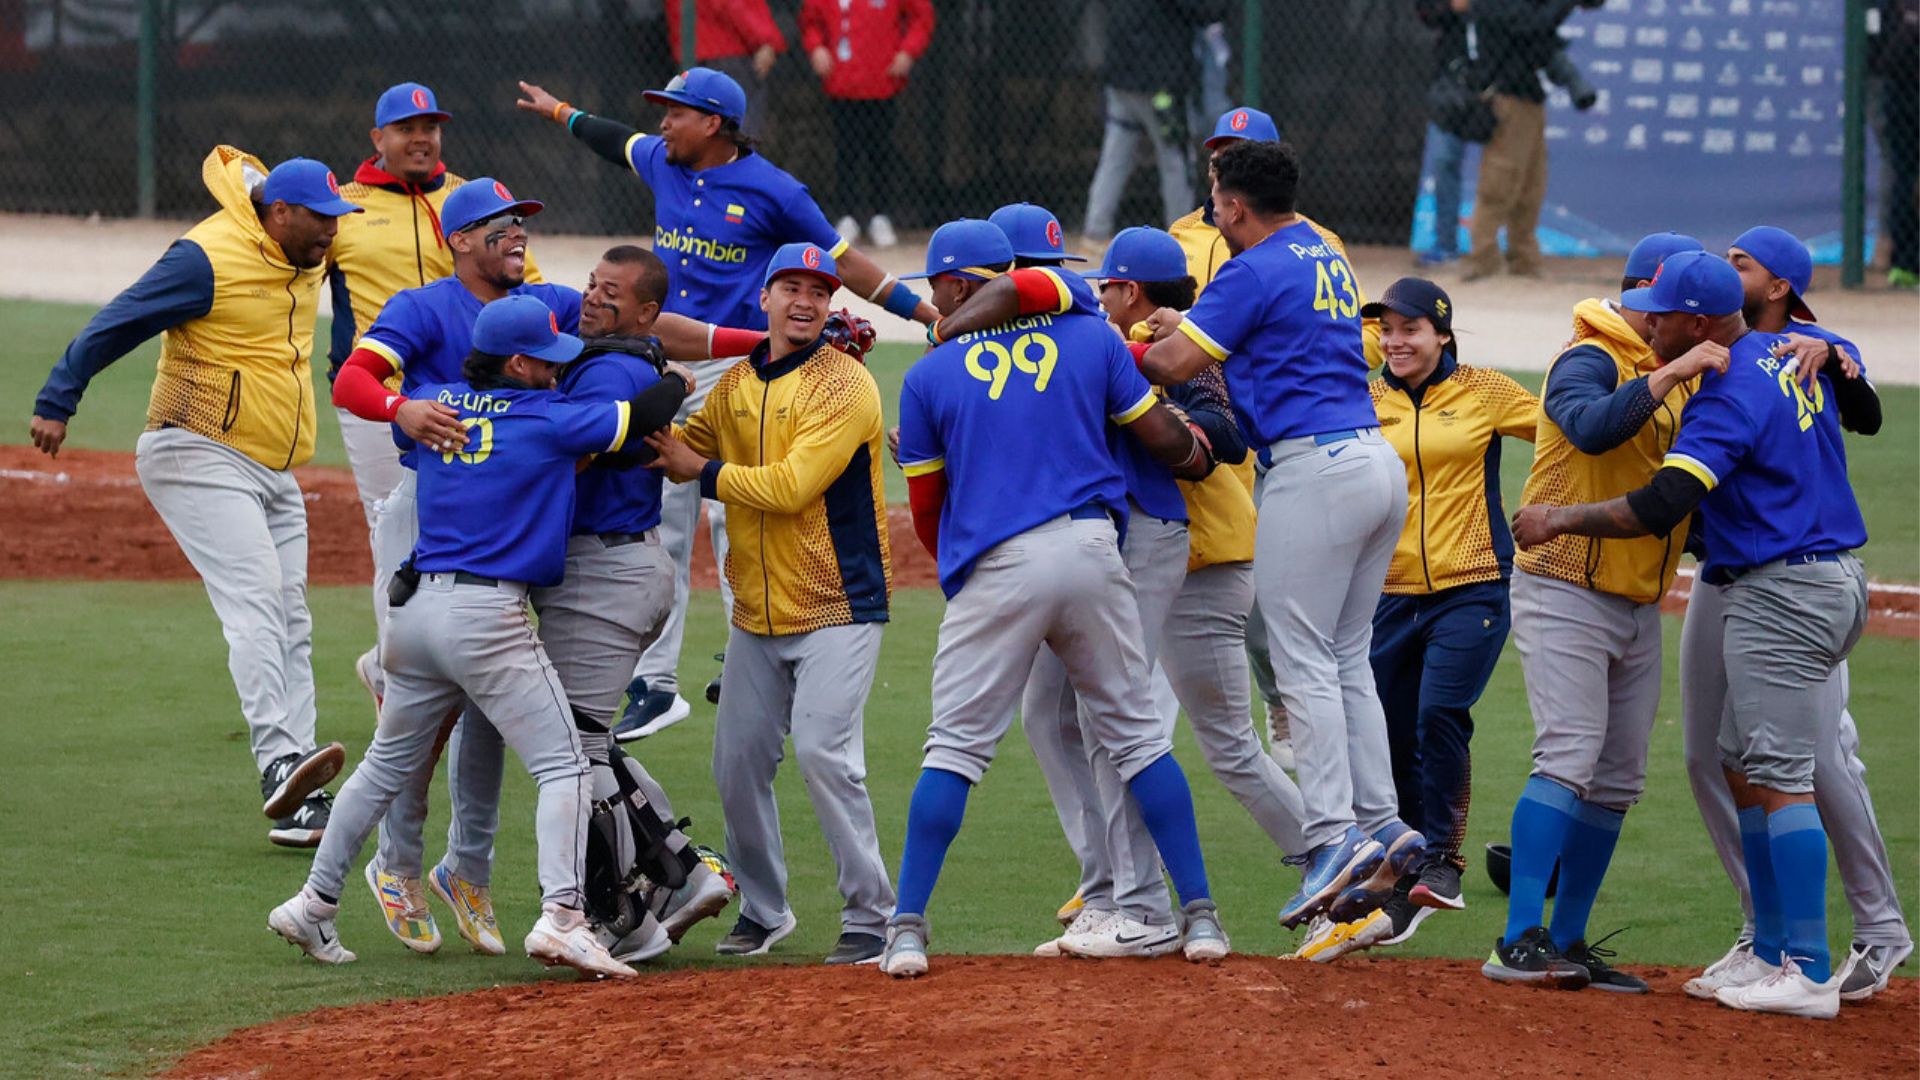 Baseball: Colombia obtains gold medal for the First Time